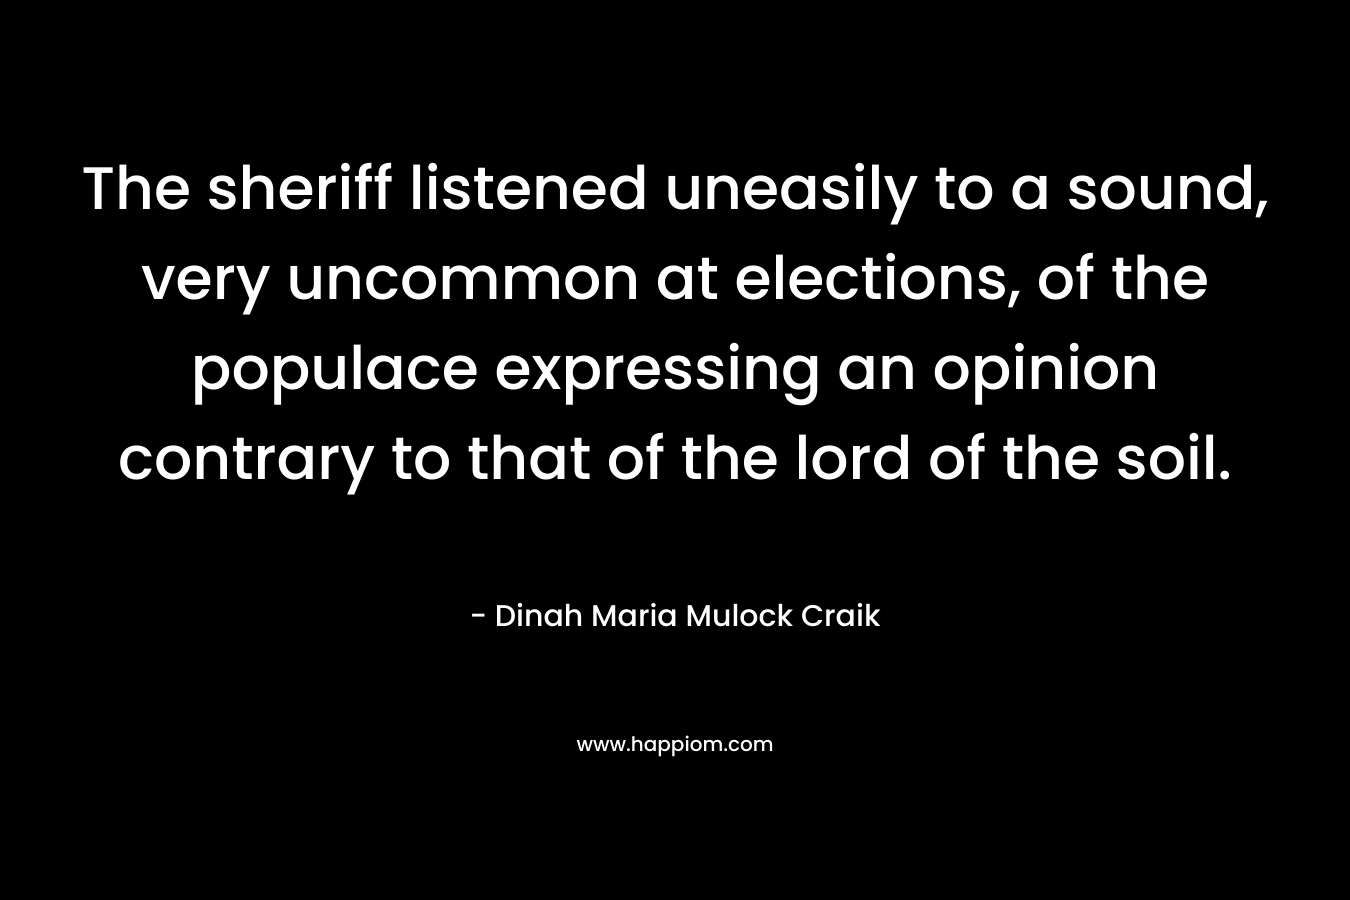 The sheriff listened uneasily to a sound, very uncommon at elections, of the populace expressing an opinion contrary to that of the lord of the soil.